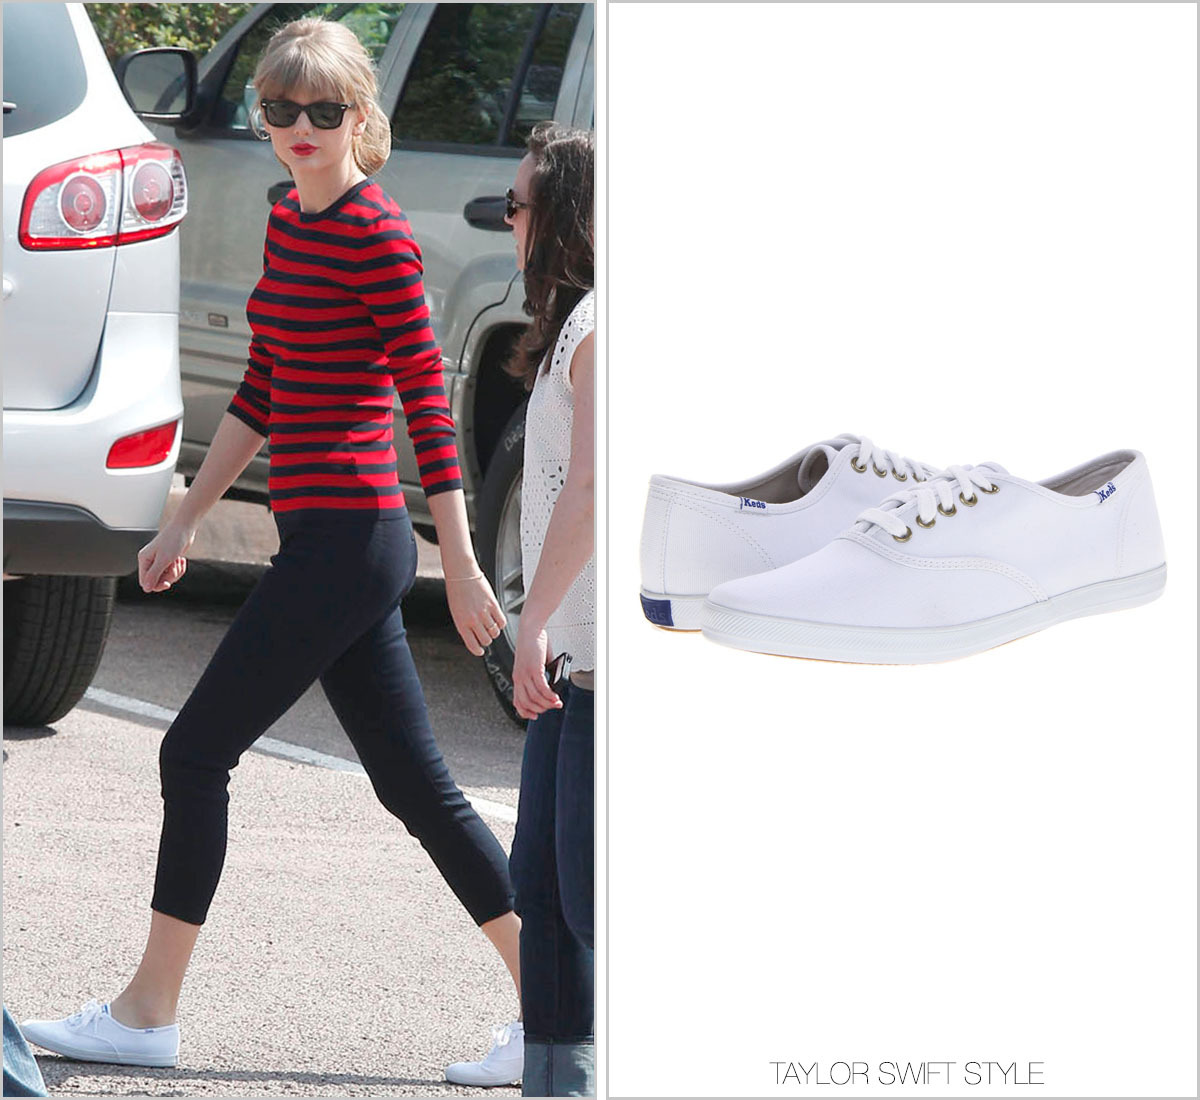 Taylor Swift Style — Filming a Keds 